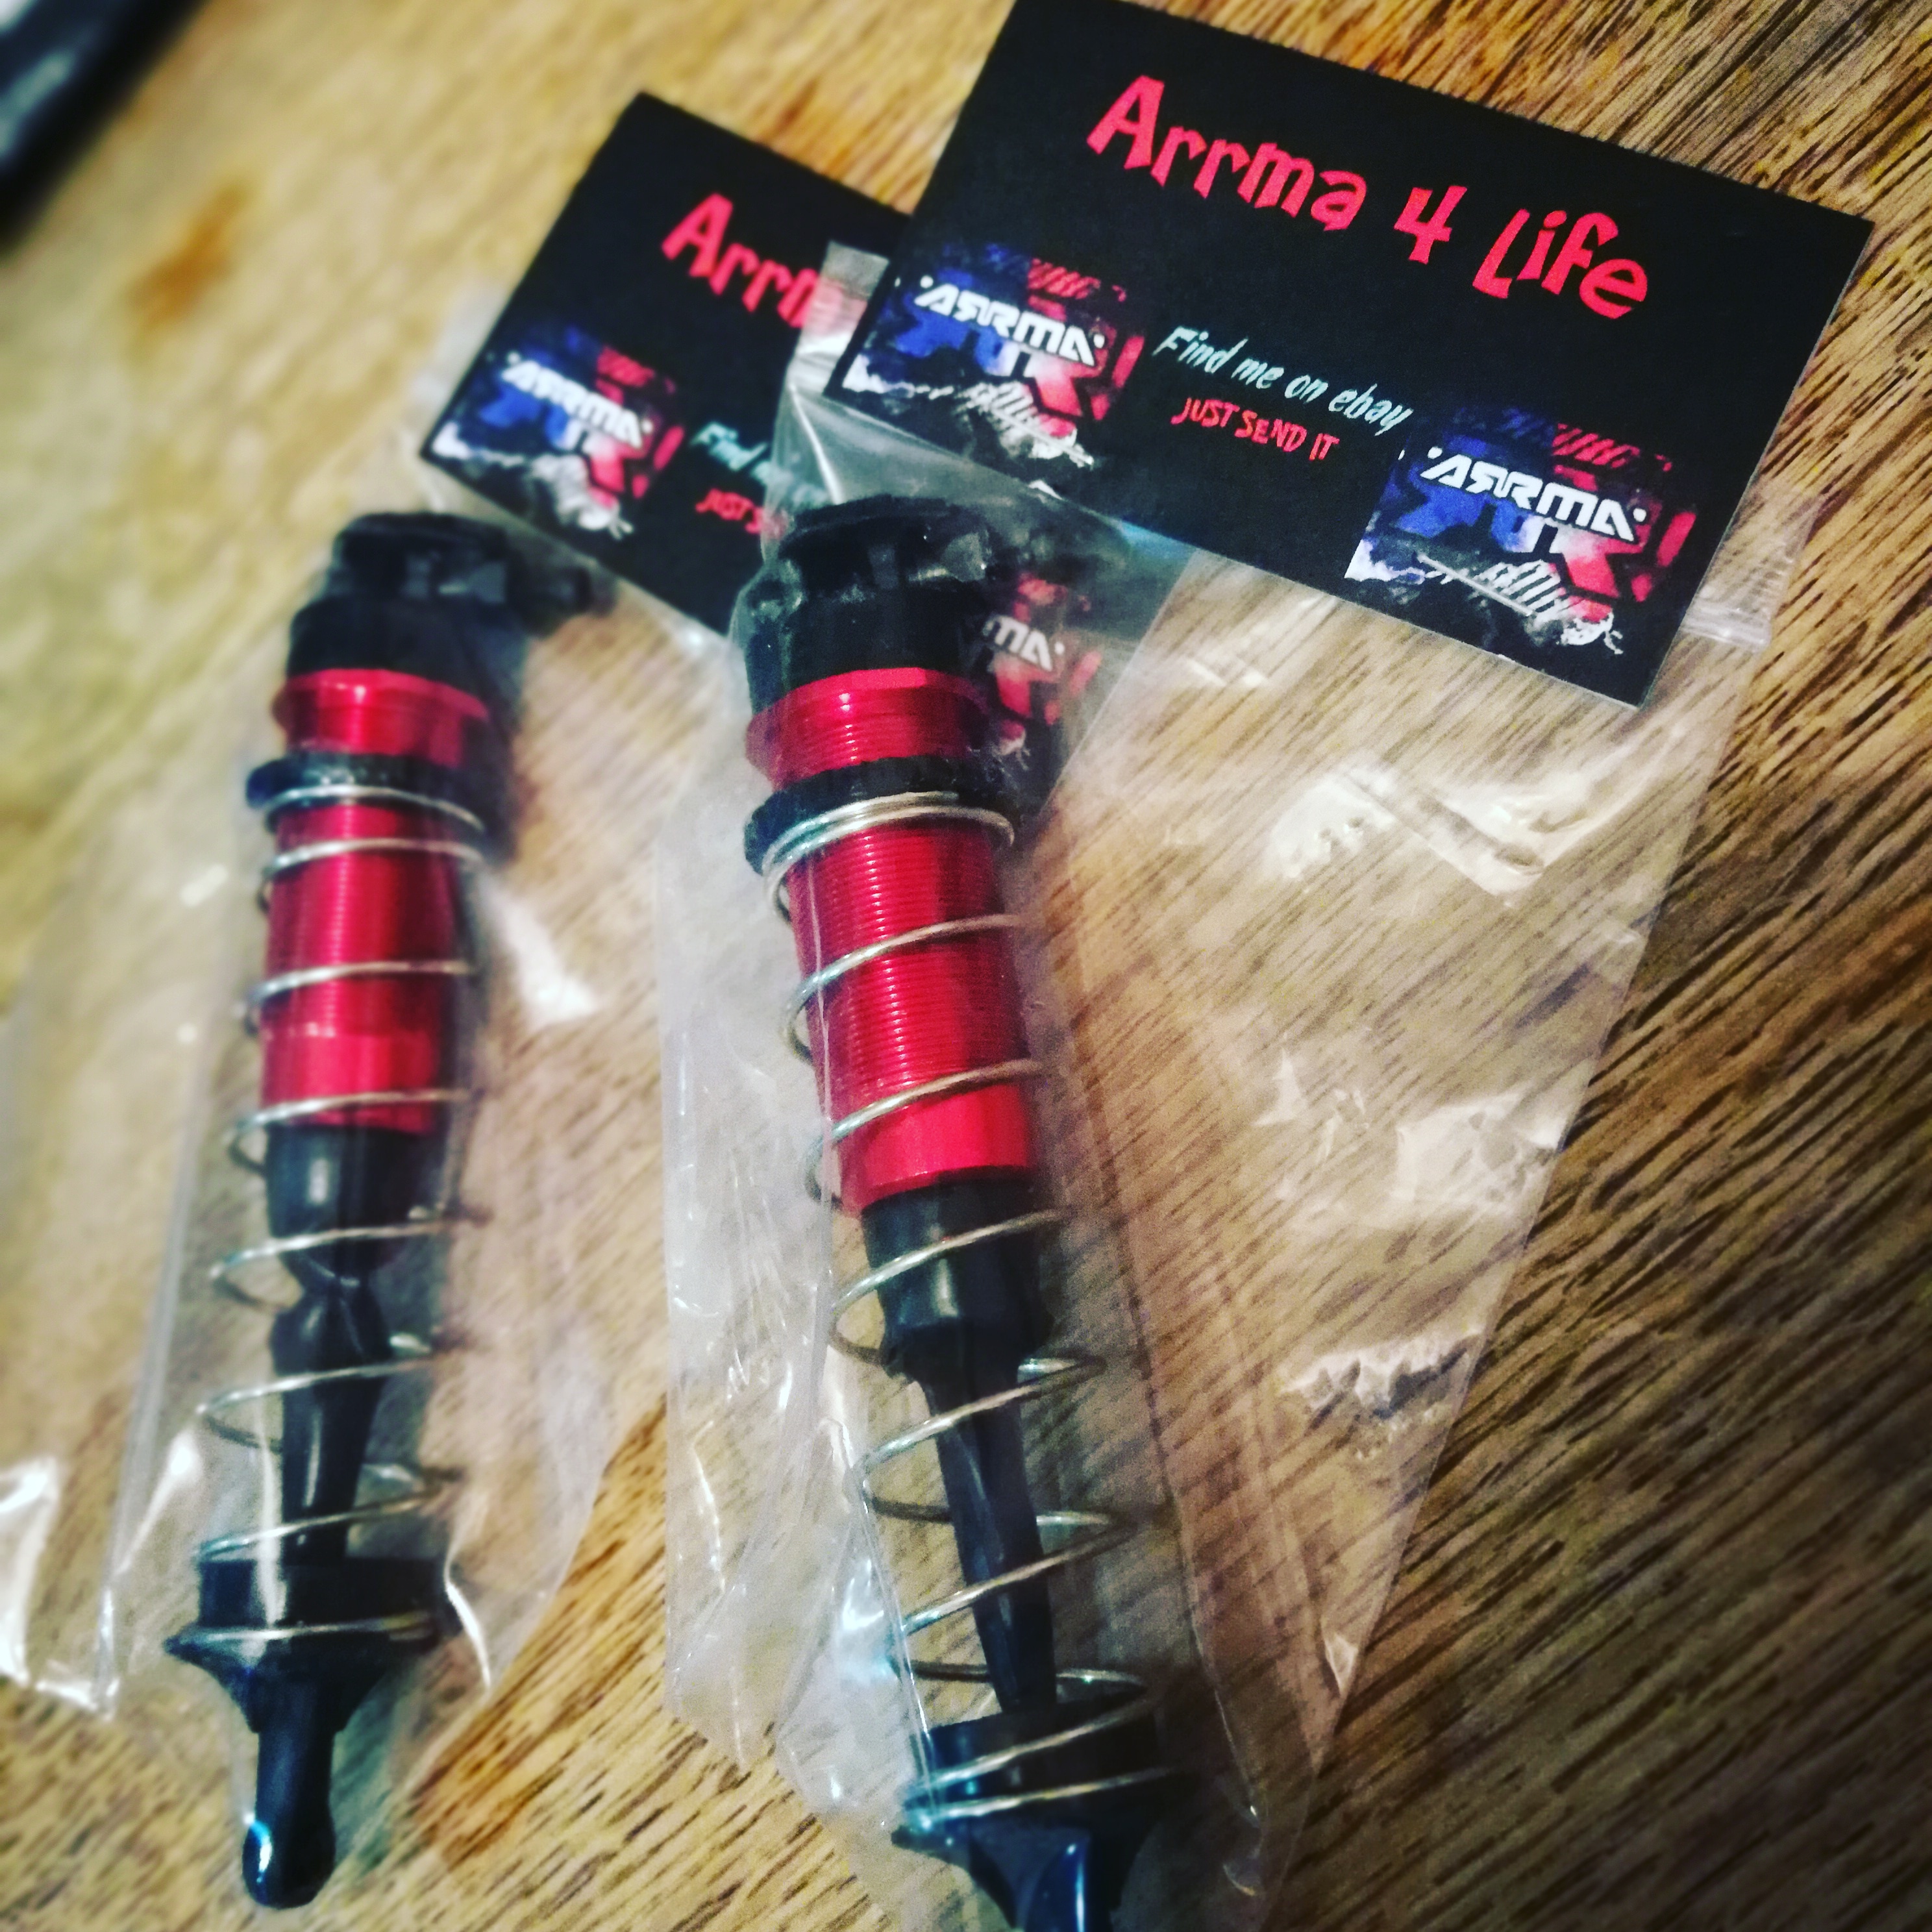 ARRMA4LIFE new UK parts suppliers